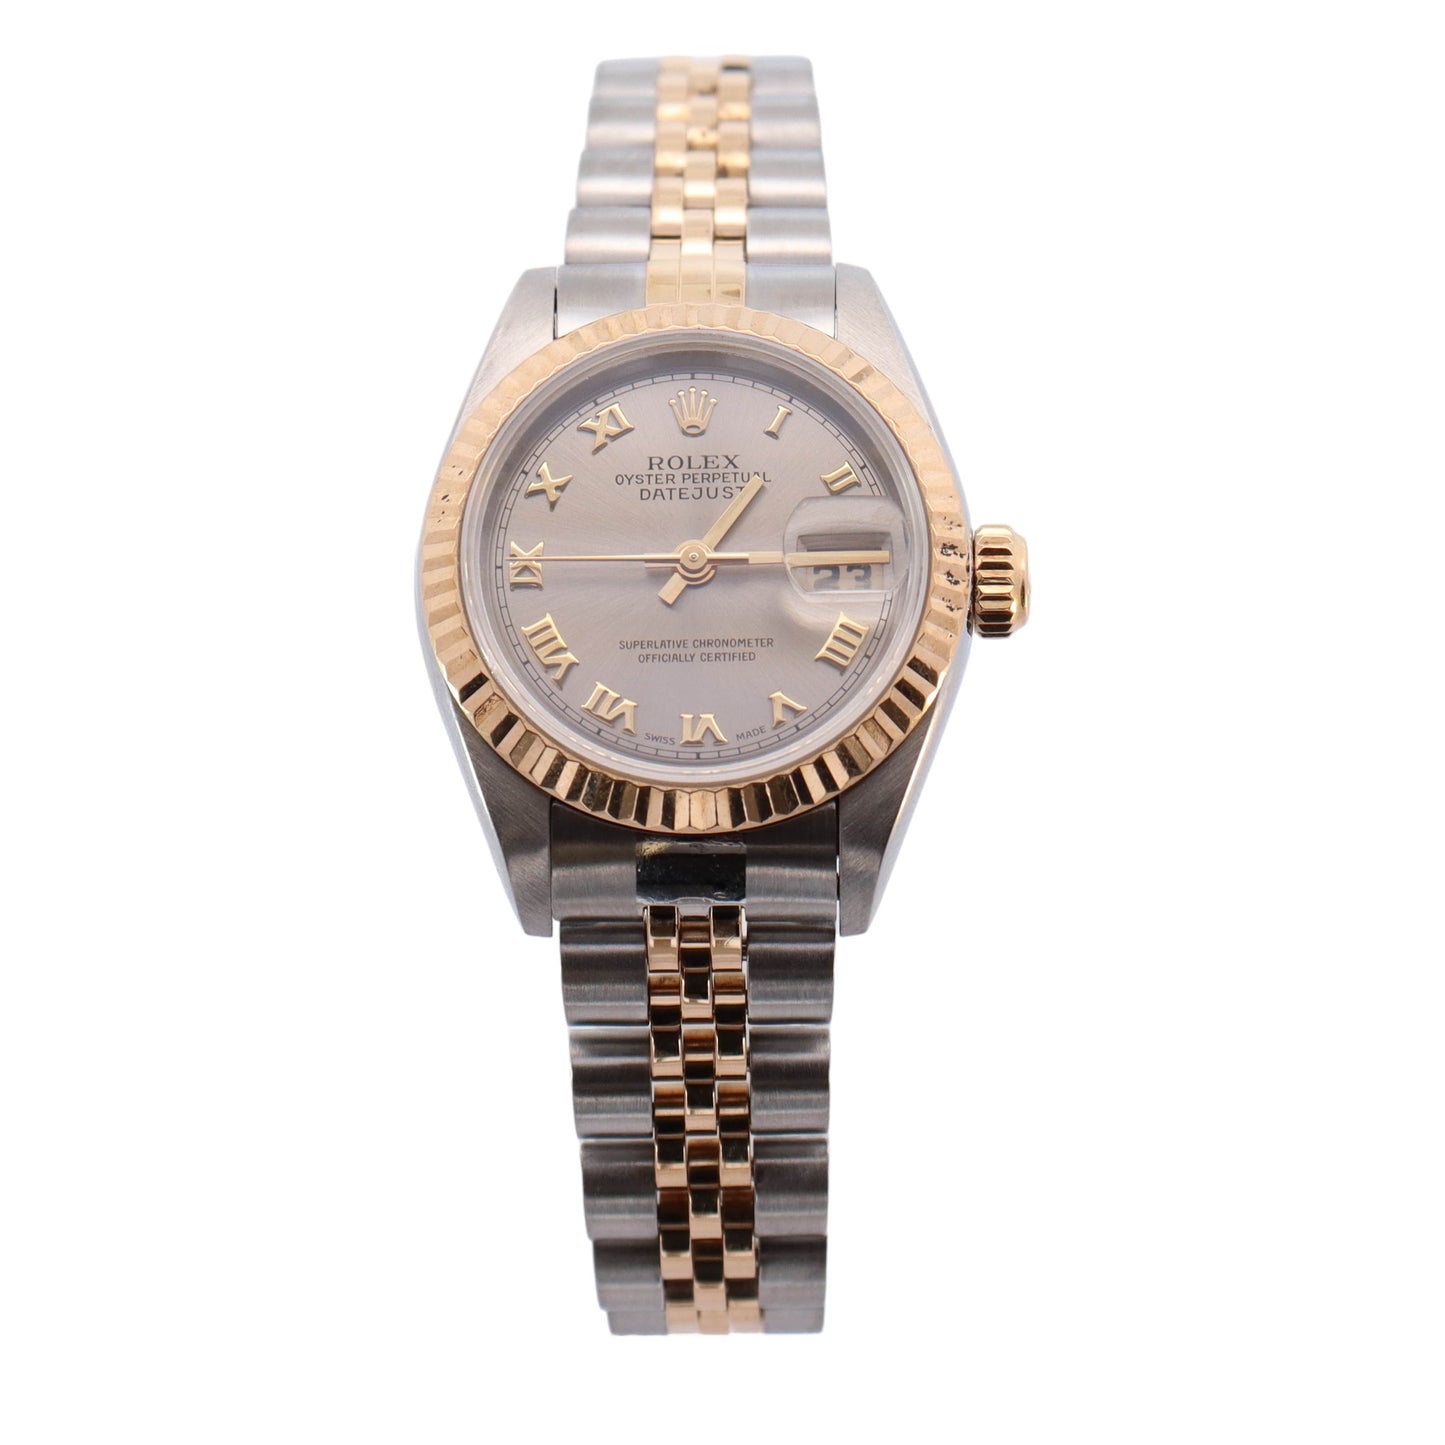 Rolex Datejust Two Tone Stainless Steel & Yellow Gold Grey Roman Dial Watch Reference #: 69173